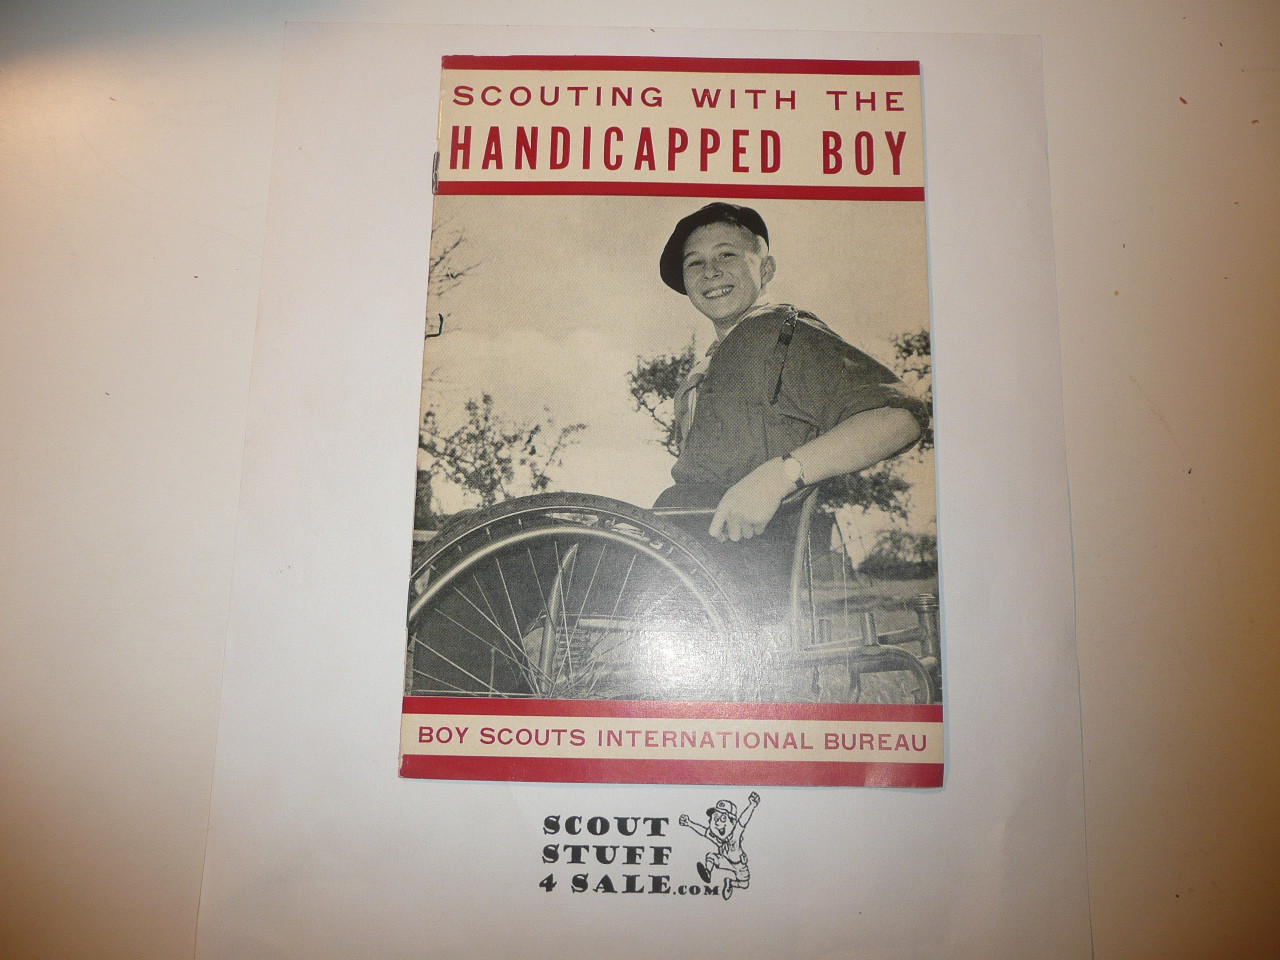 Scouting with the Handicapped Boy, Boy Scouts International Bureau, 1958 printing